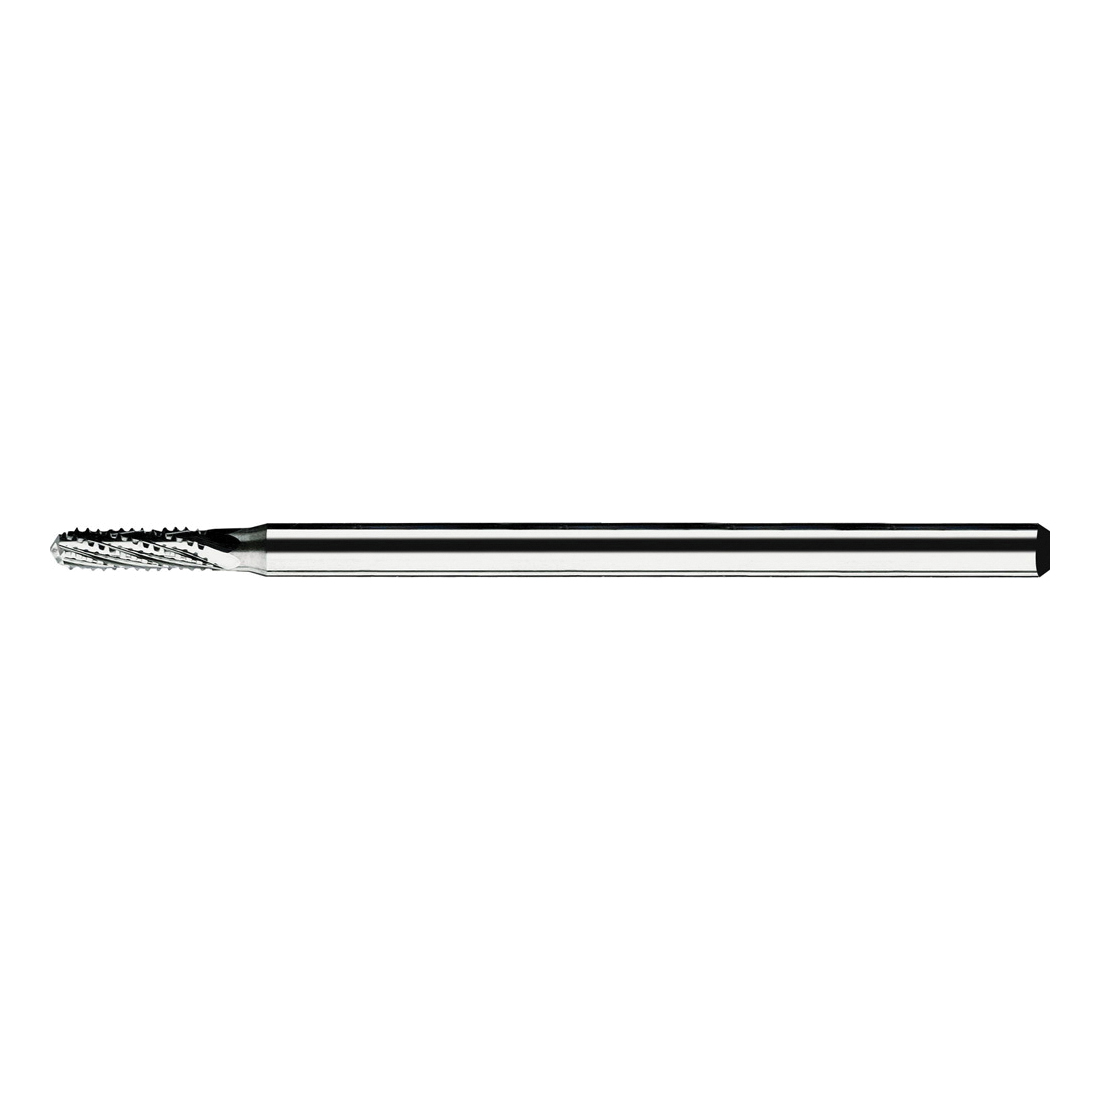 Uncoated KYOCERA 226-1031.400 Series 226 Micro Drill Bit Carbide 10.20 mm Cutting Length 2 Flutes 38 mm Length 2.62 mm Cutting Diameter 3 mm Shank Diameter 130 Degree Cutting Angle